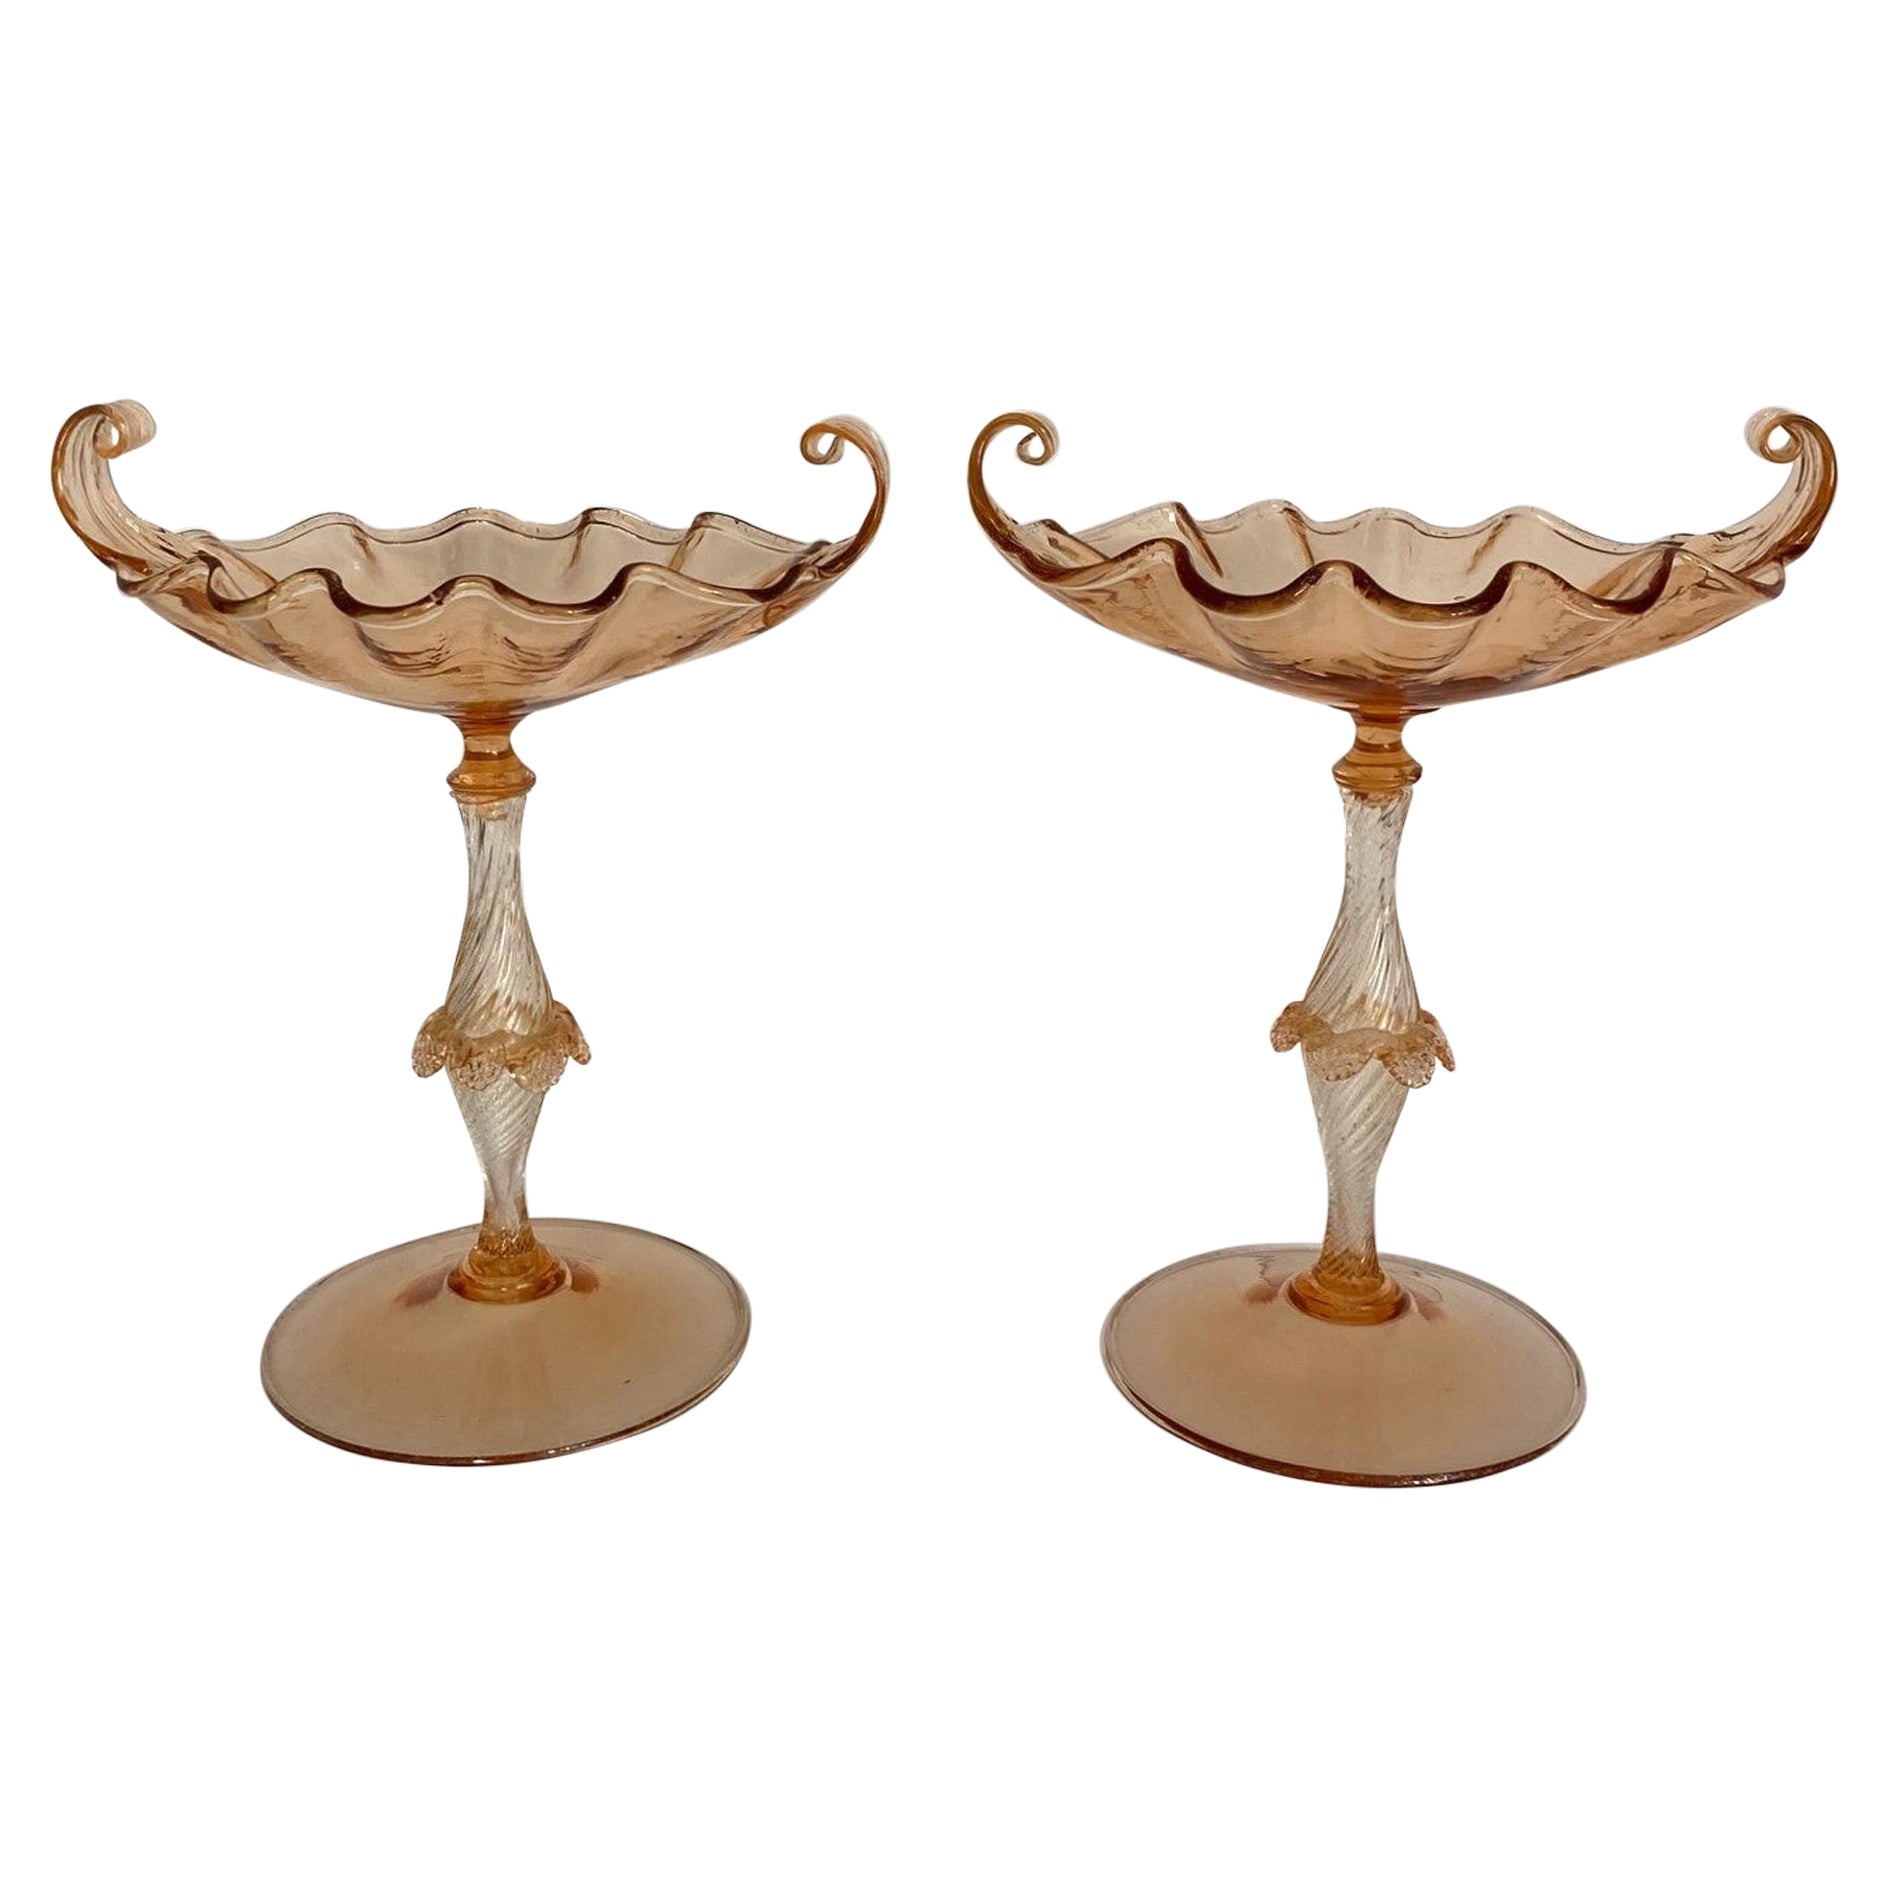 Murano Candy Compote Bowl Set of 2